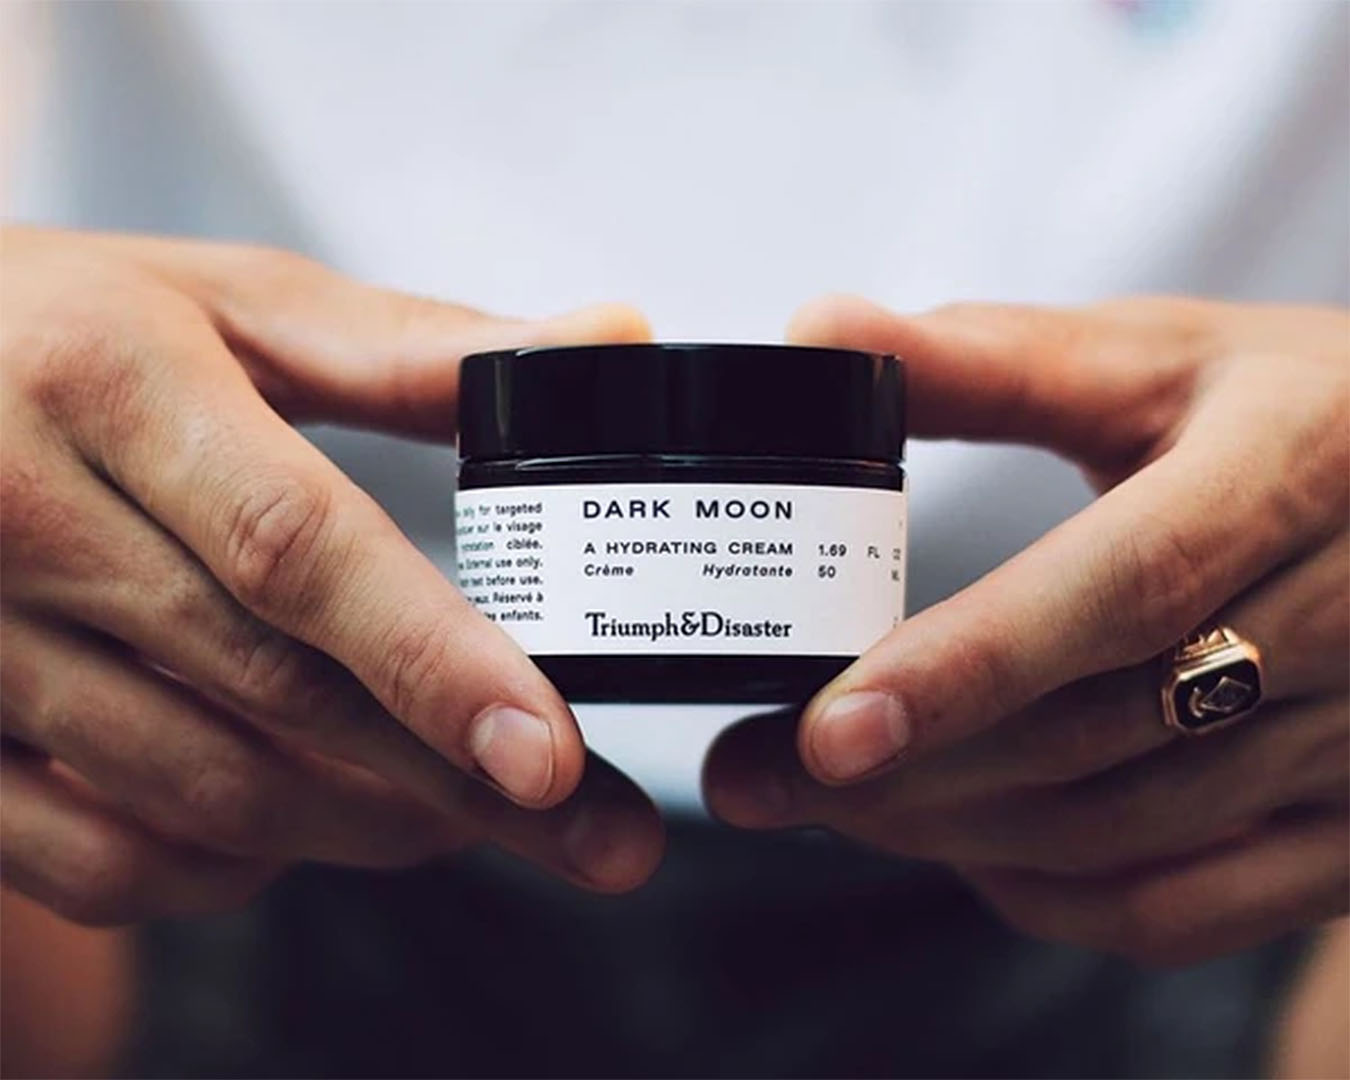 A man holds the Triumph & Disaster Dark Moon Hydrating Cream in his hands.